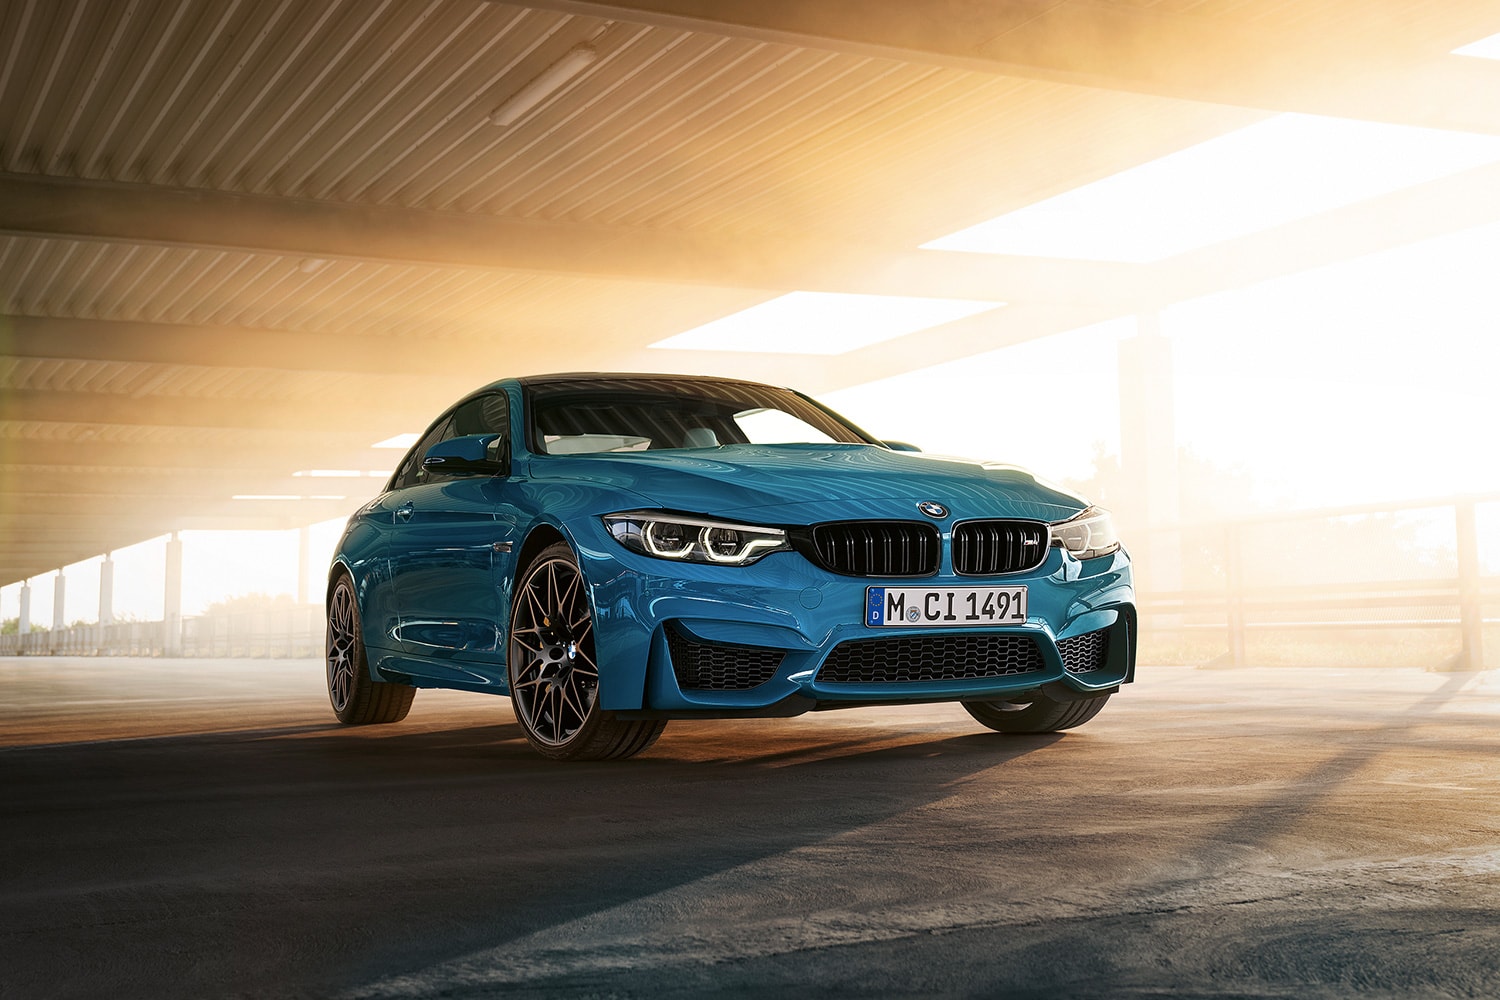 BMW 2020 M4 Edition ///M Heritage Coupe 750 units limited worldwide globally gmbh logo Laguna Seca Blue, Velvet Blue or Imola Red II carbon fiber  Competition Package Coupes